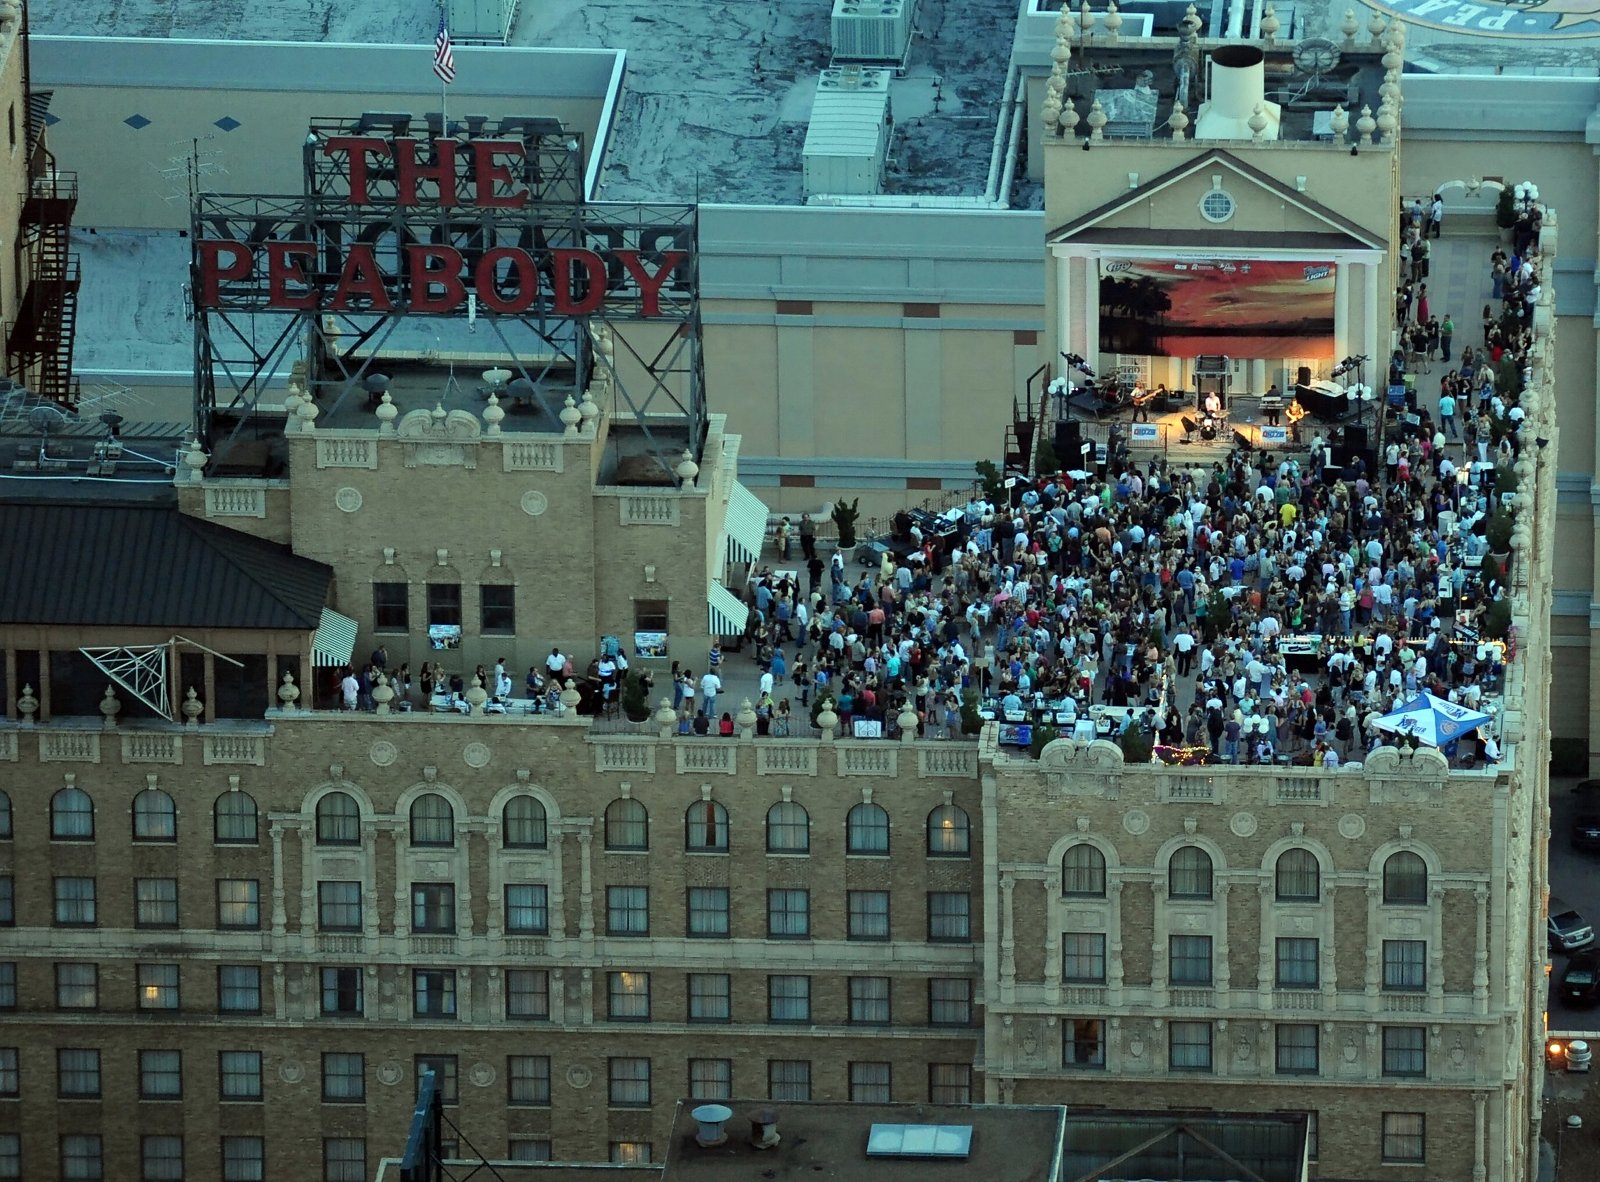 Peabody rooftop party info for tonight » Paul Ryburn's Journal